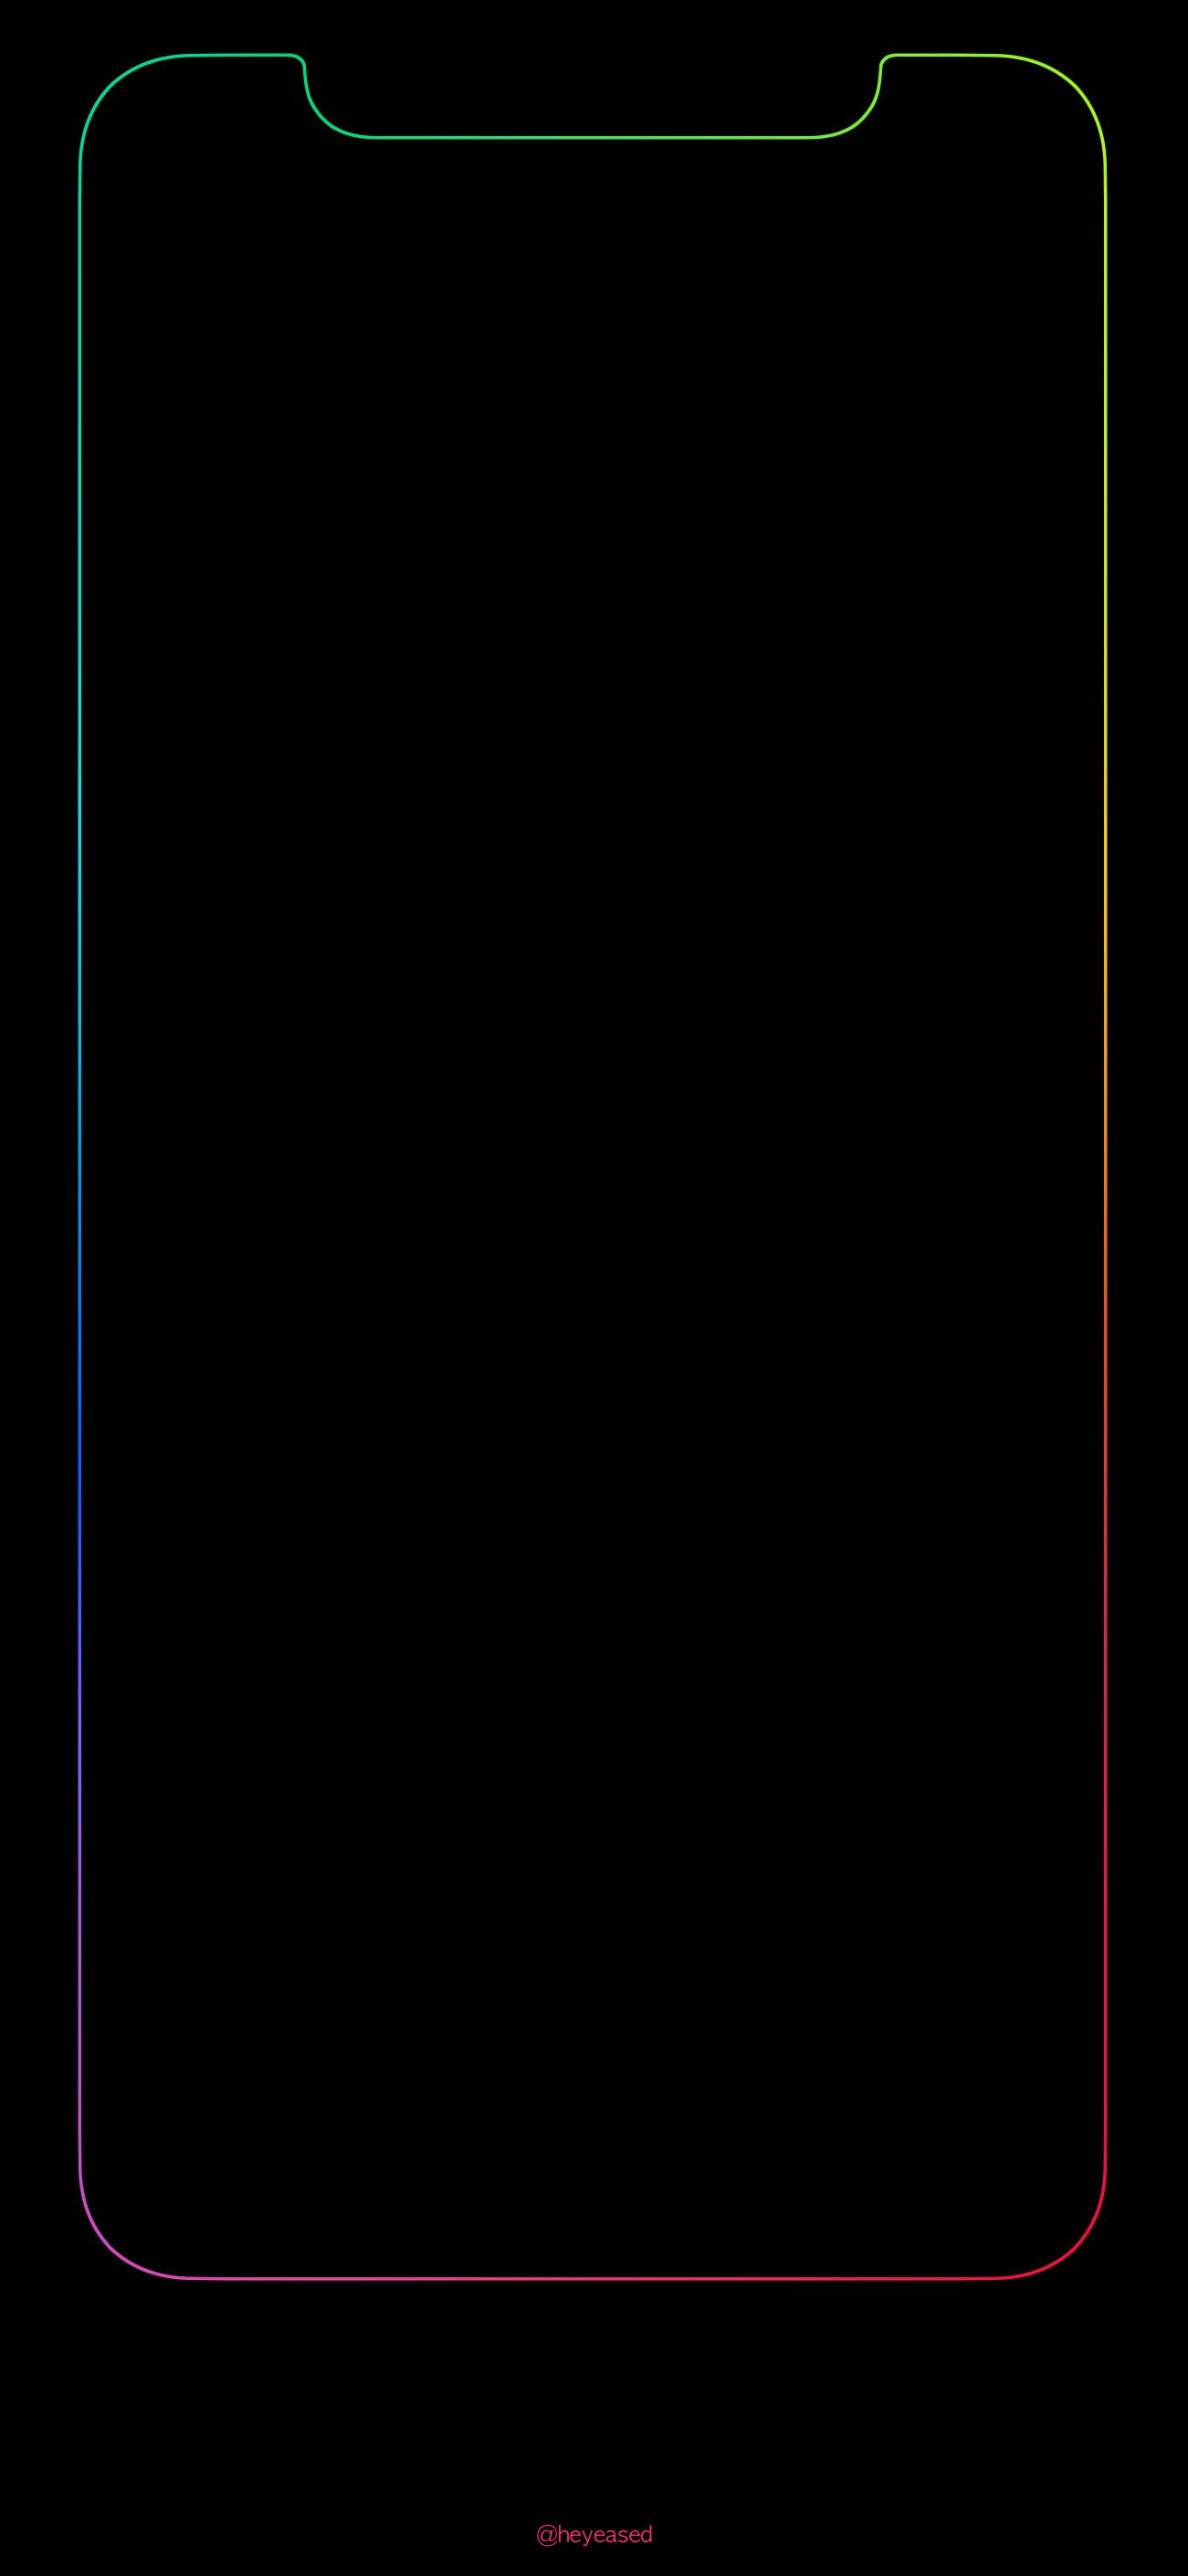 Anyone know of a backgrounds like this for the Pixel 3XL? : GooglePixel